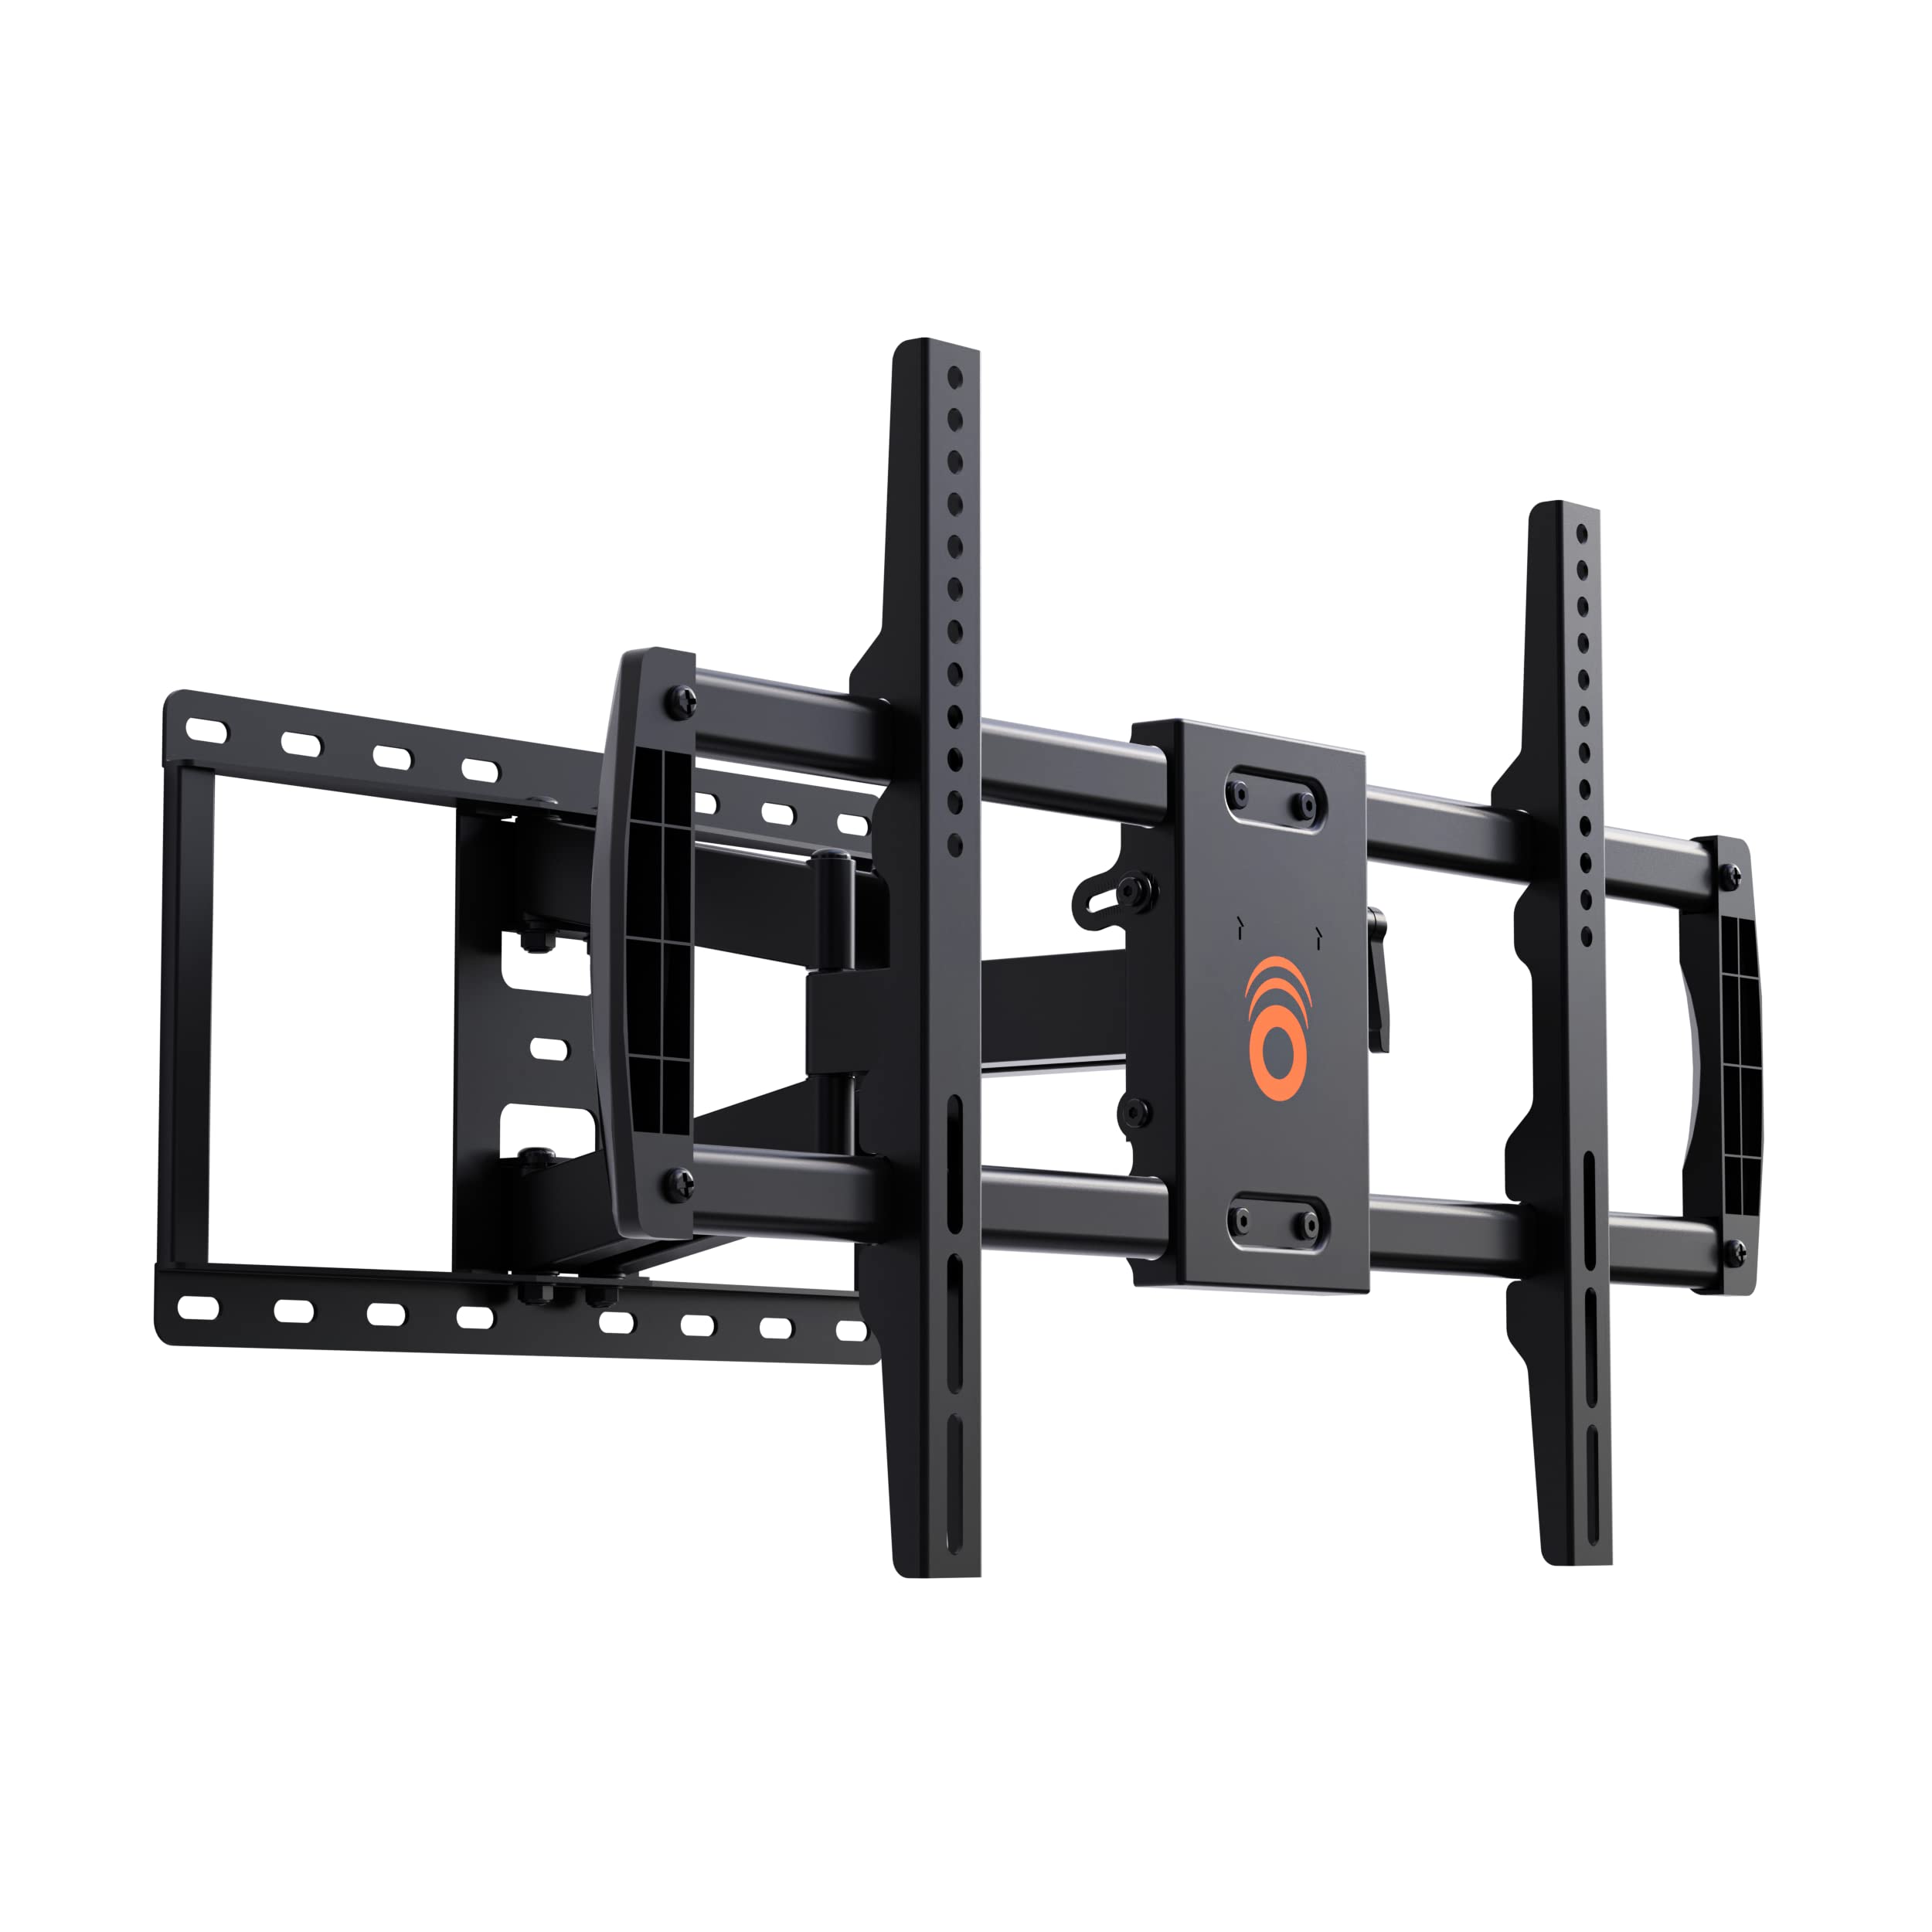 ECHOGEAR Full Motion Articulating TV Wall Mount Bracket for TVs Up to 75